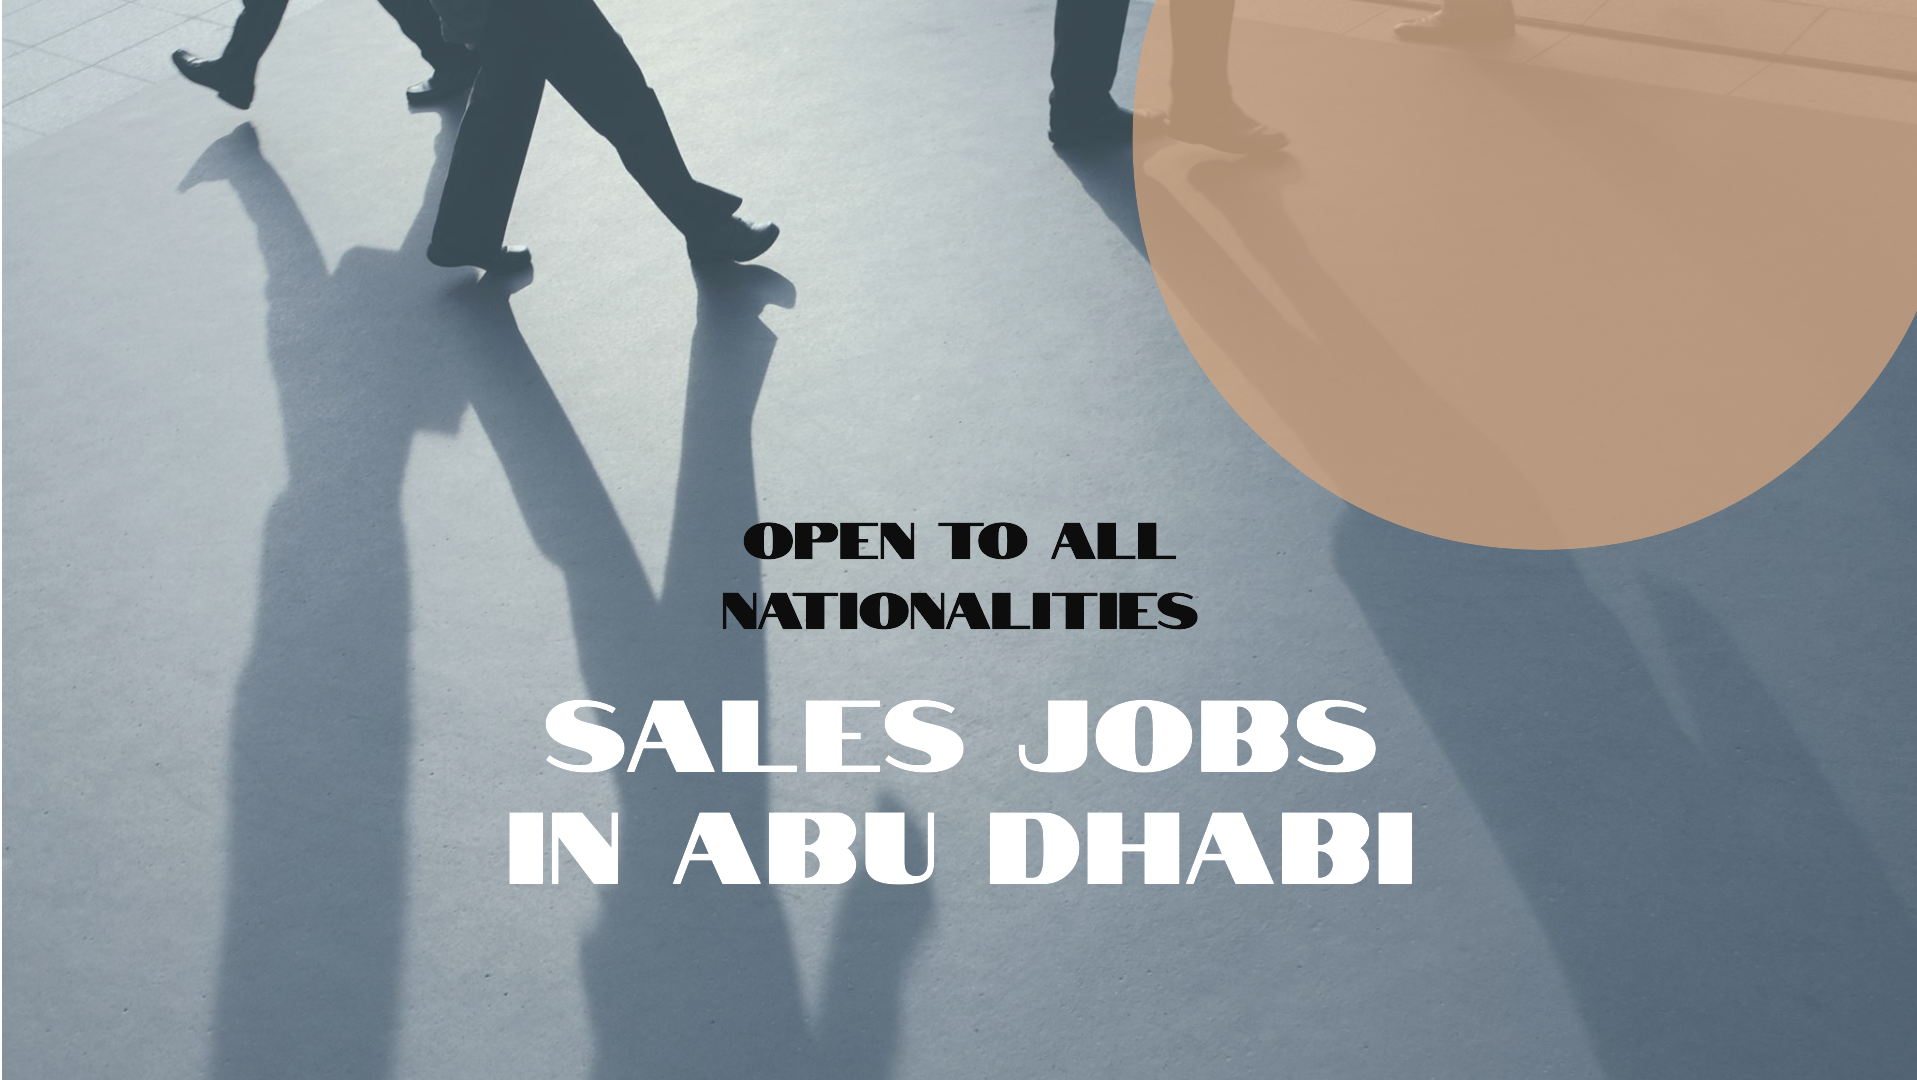 Sales jobs in Abu Dhabi for all nationalities